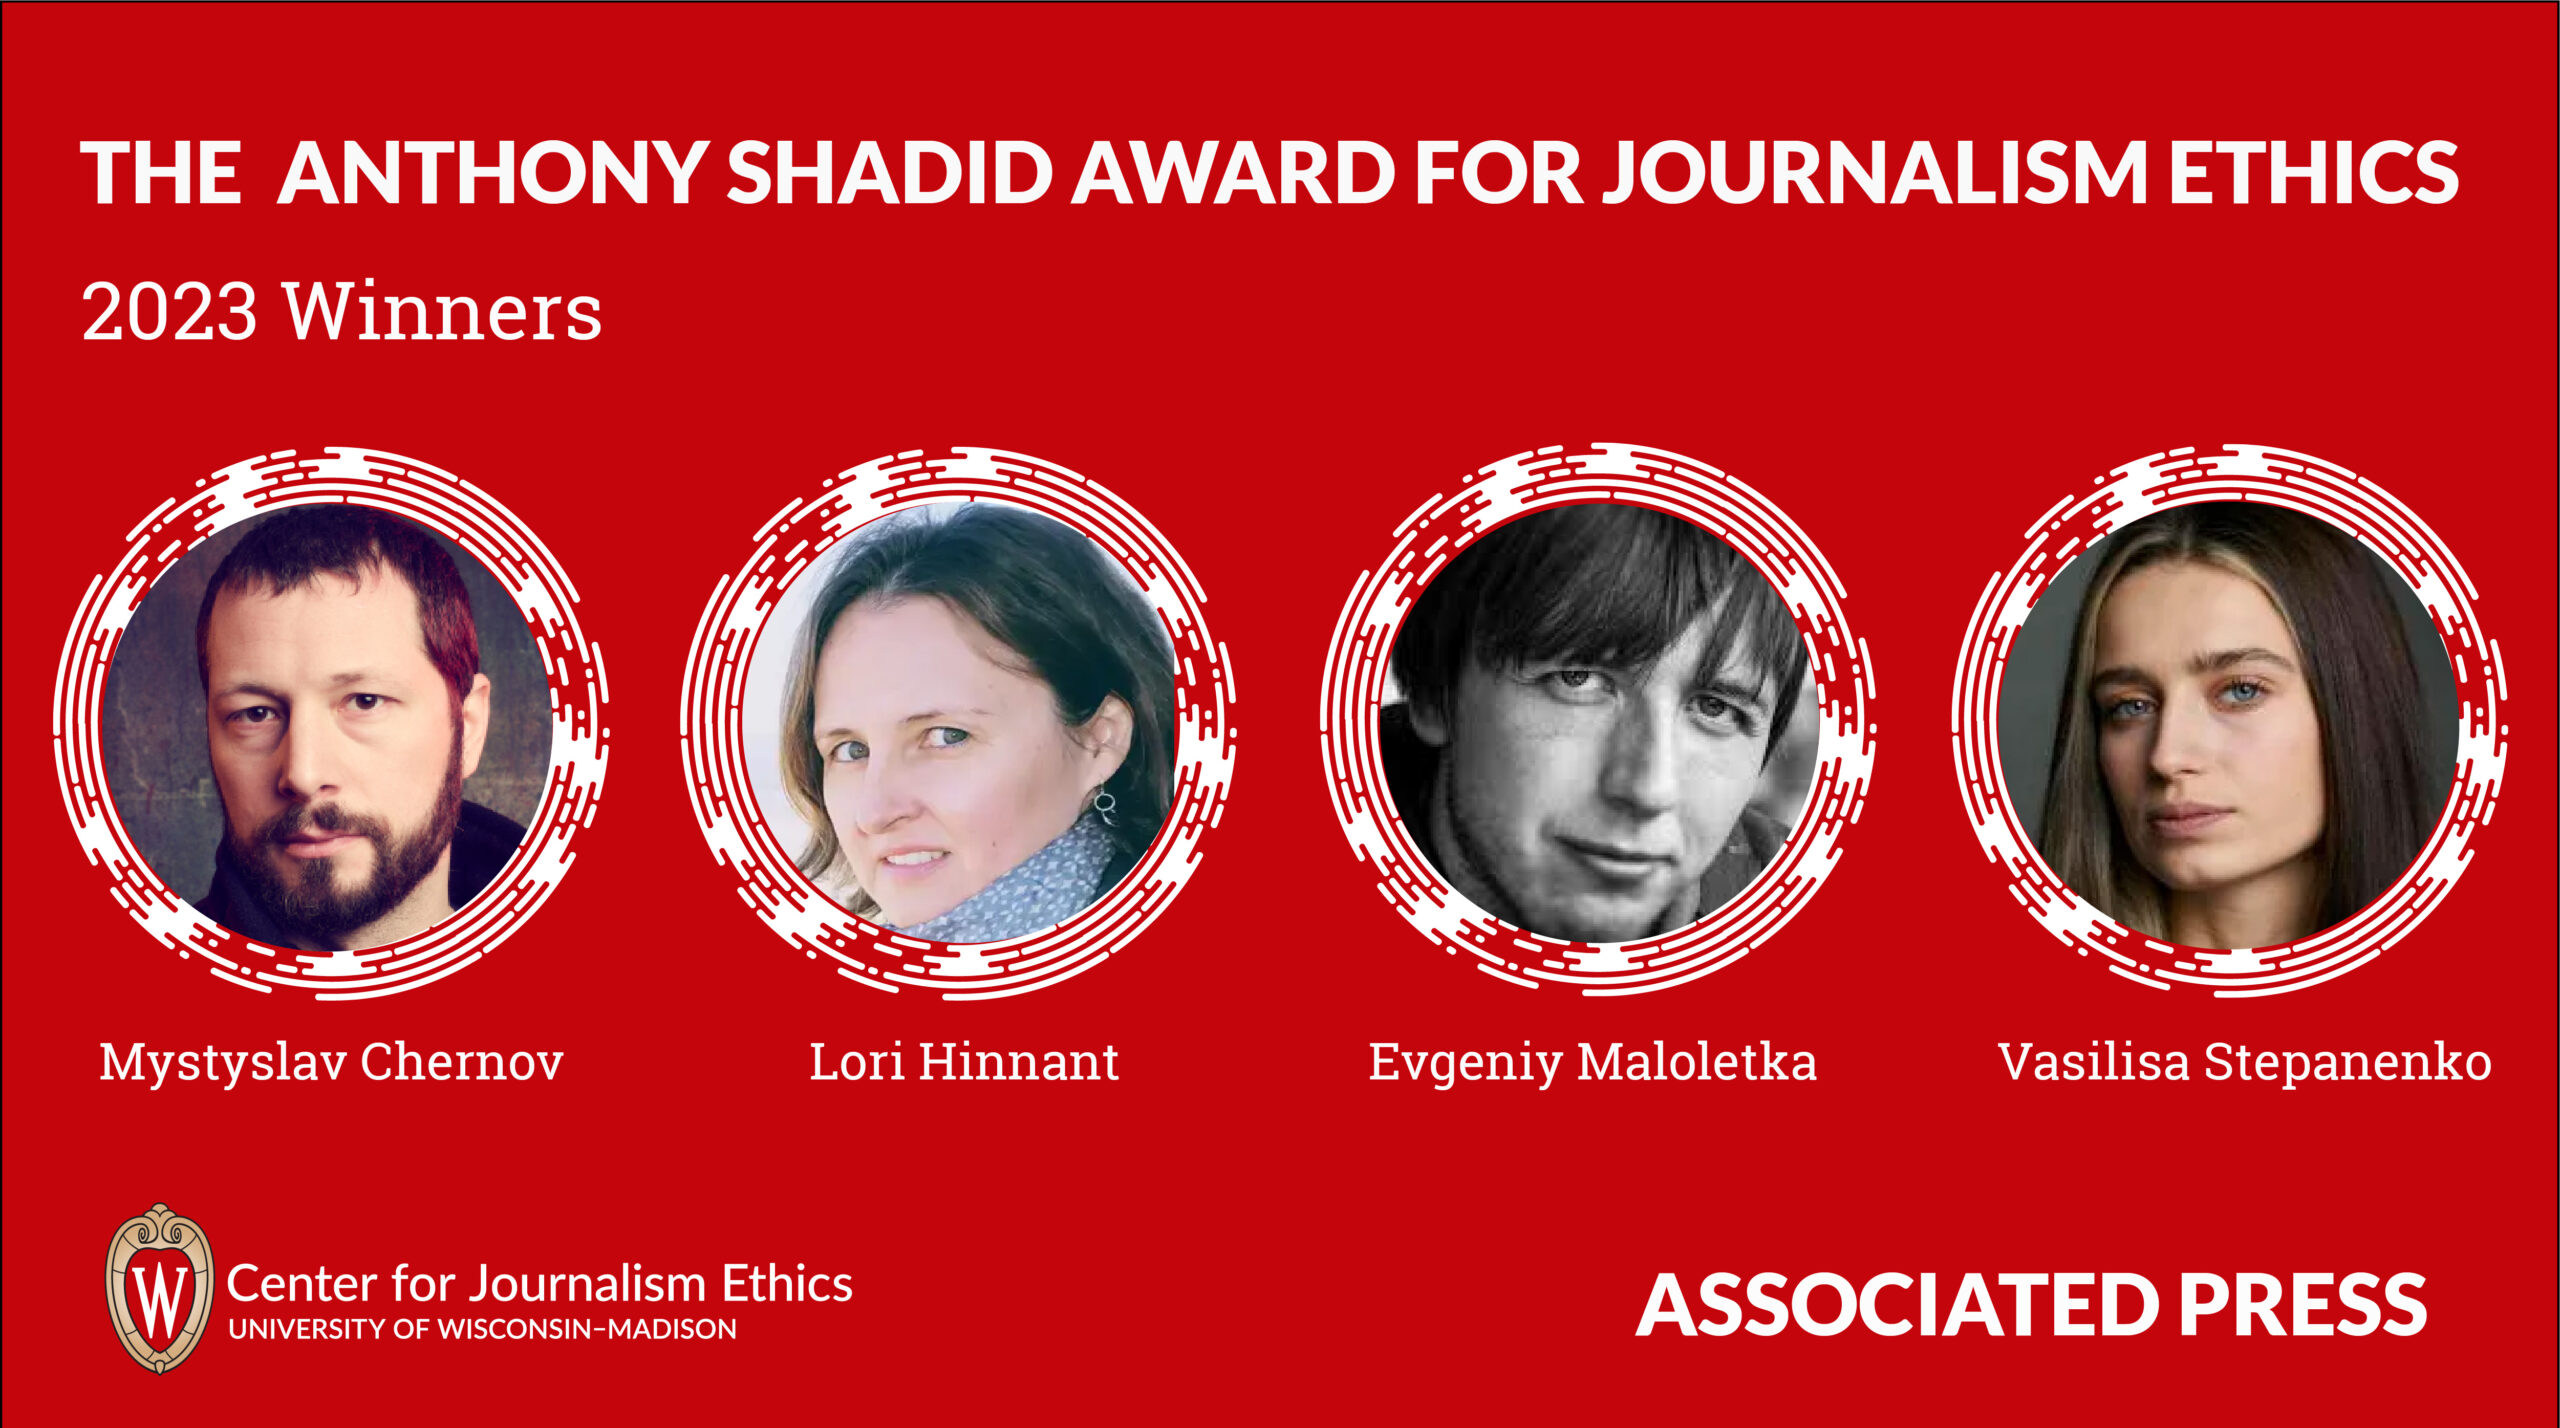 Graphic showing the head shots of the 2023 winners of the Anthony Shadid Award for Journalism Ethics. The Associated Press team includes: Mystyslav Chernov, Lori Hinnant, Evgeniy Maloletka and Vasilisa Stepanenko.